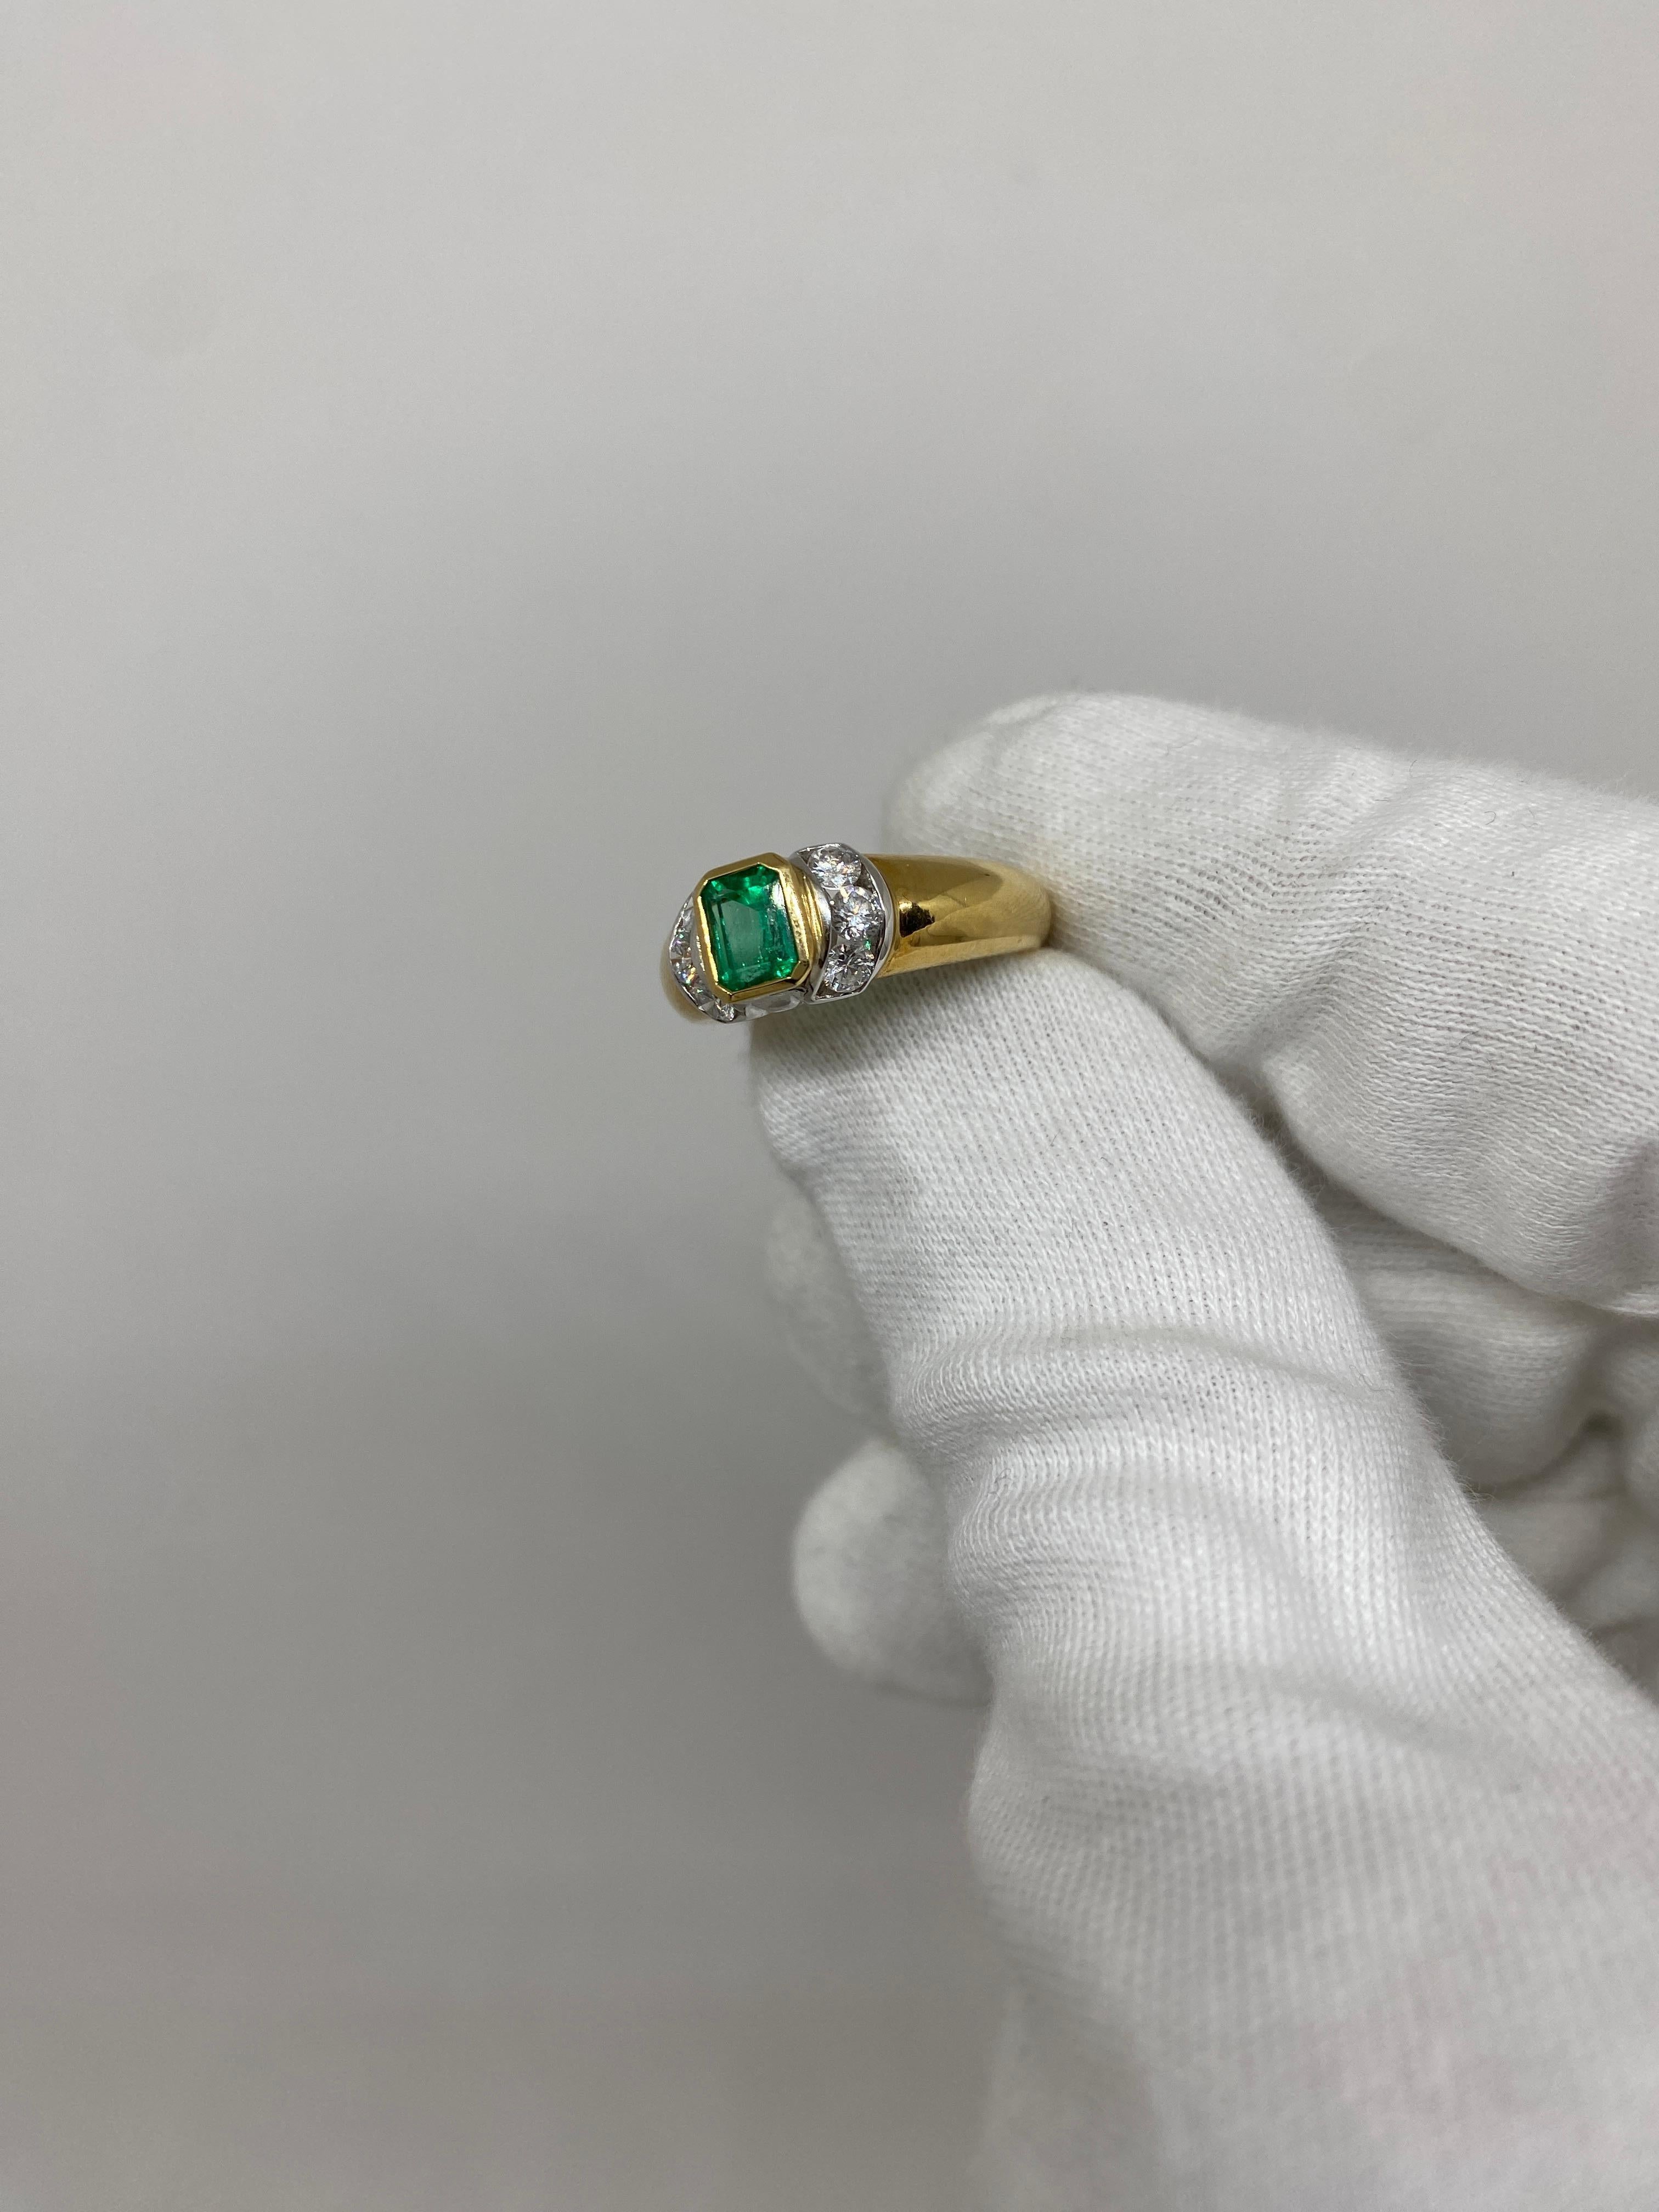 Ring made of 18kt yellow gold with rectangular-cut emerald for ct .0.62 and natural white brilliant-cut diamonds for ct.0.46

Welcome to our jewelry collection, where every piece tells a story of timeless elegance and unparalleled craftsmanship. As